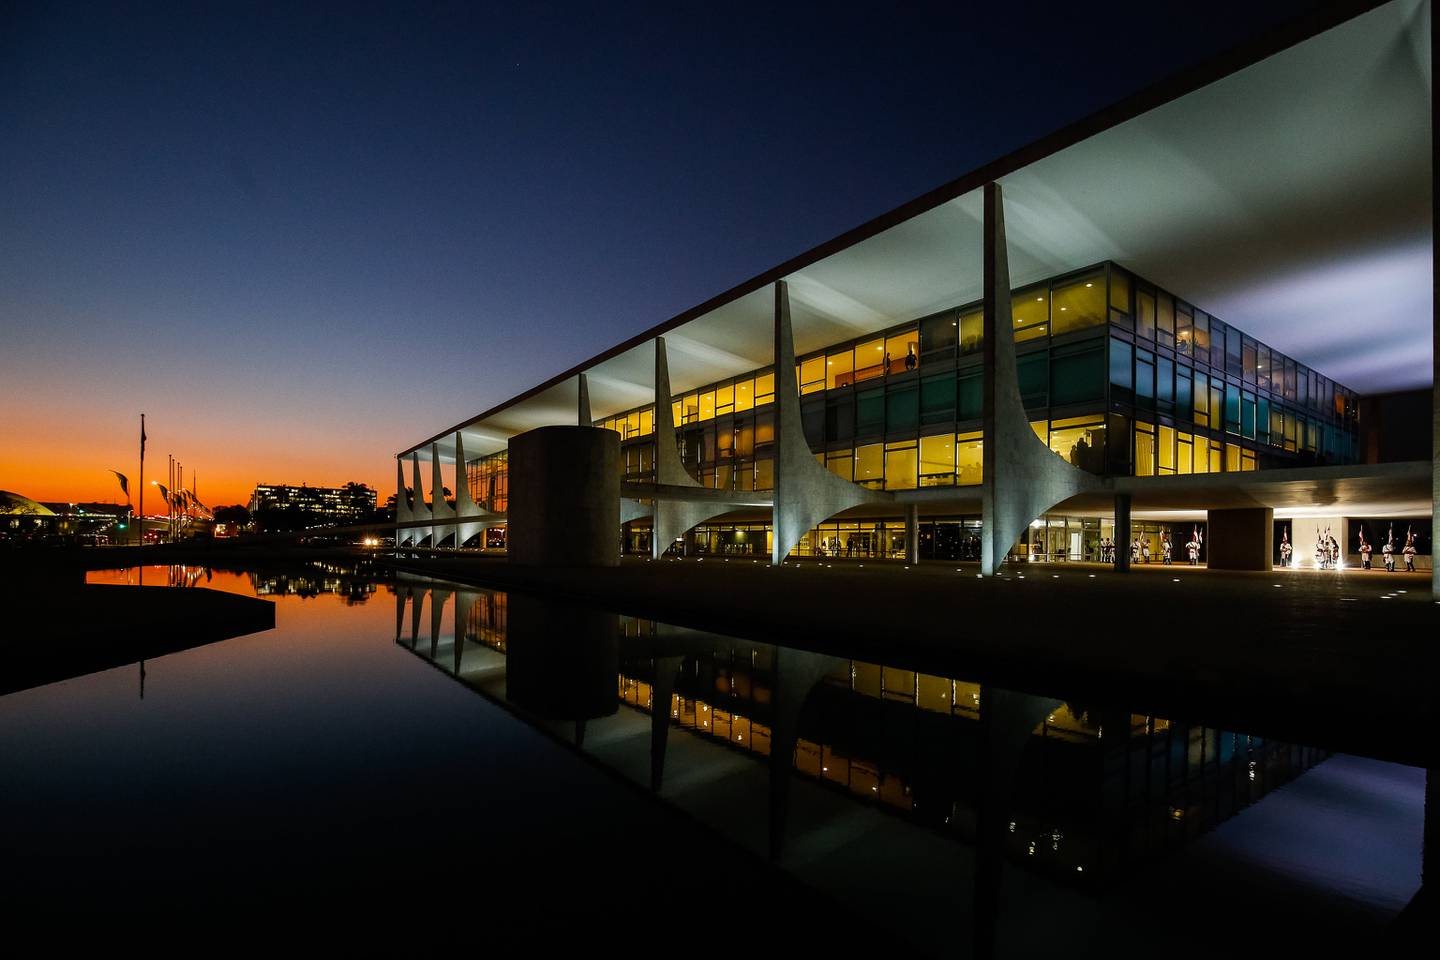 Palácio do Planalto, the building that houses Brazil's federal branch of government